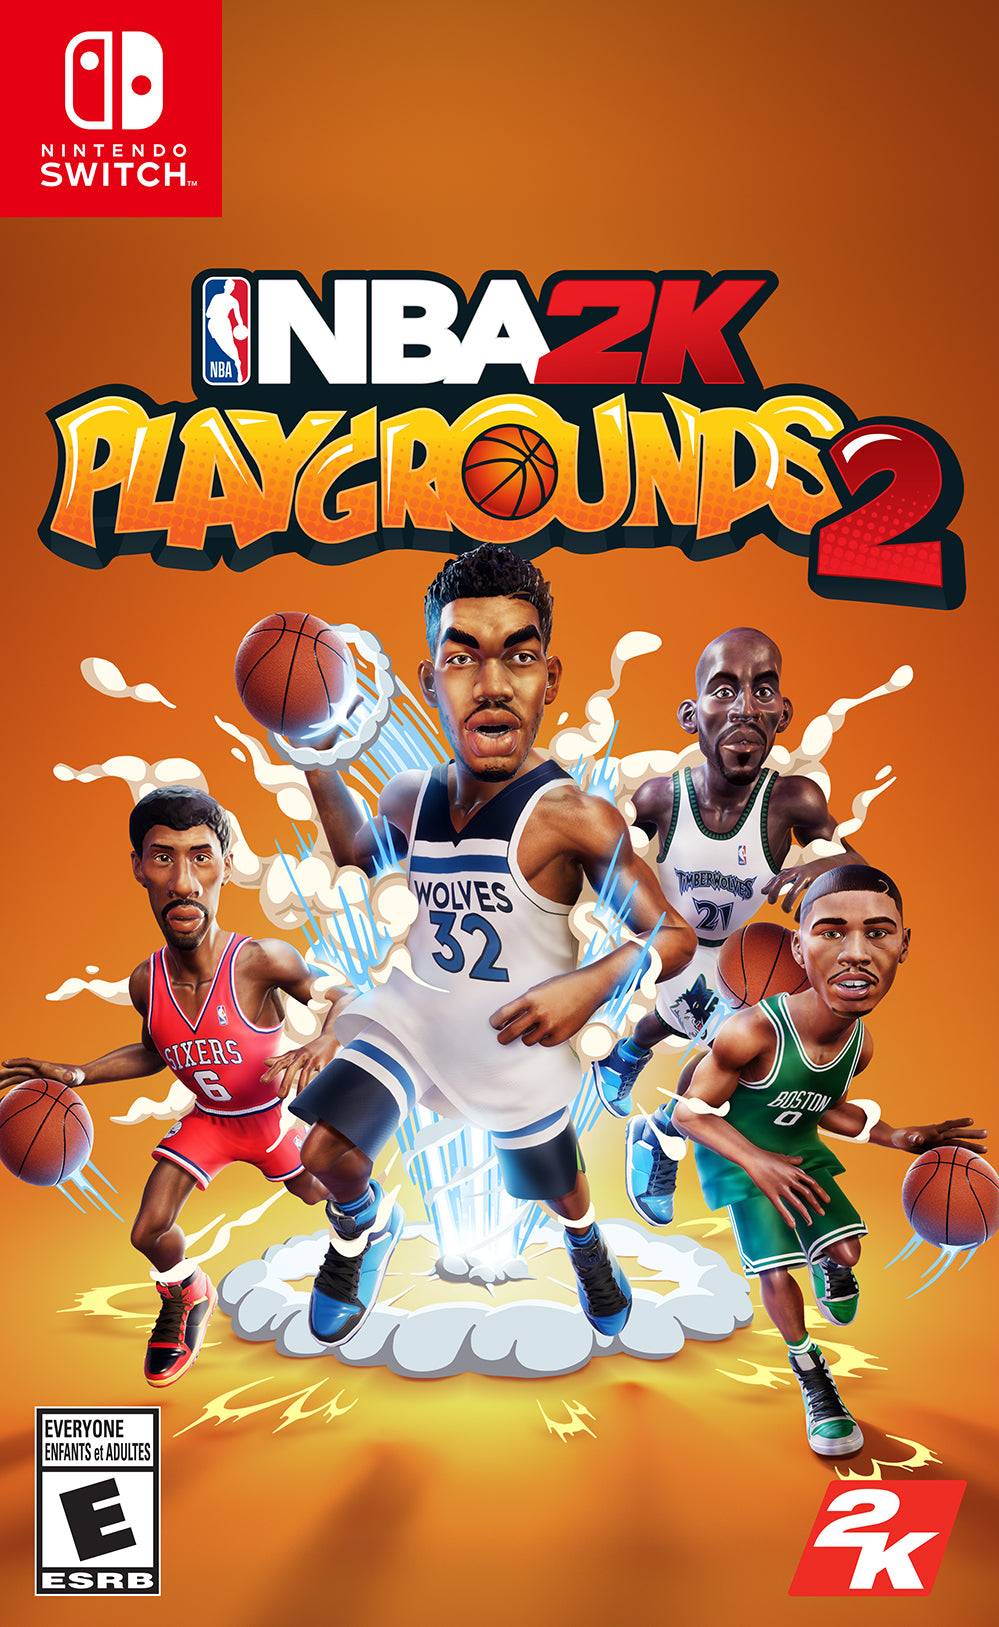 NBA 2K PLAYGROUNDS 2 (NINTENDO SWITCH) - jeux video game-x